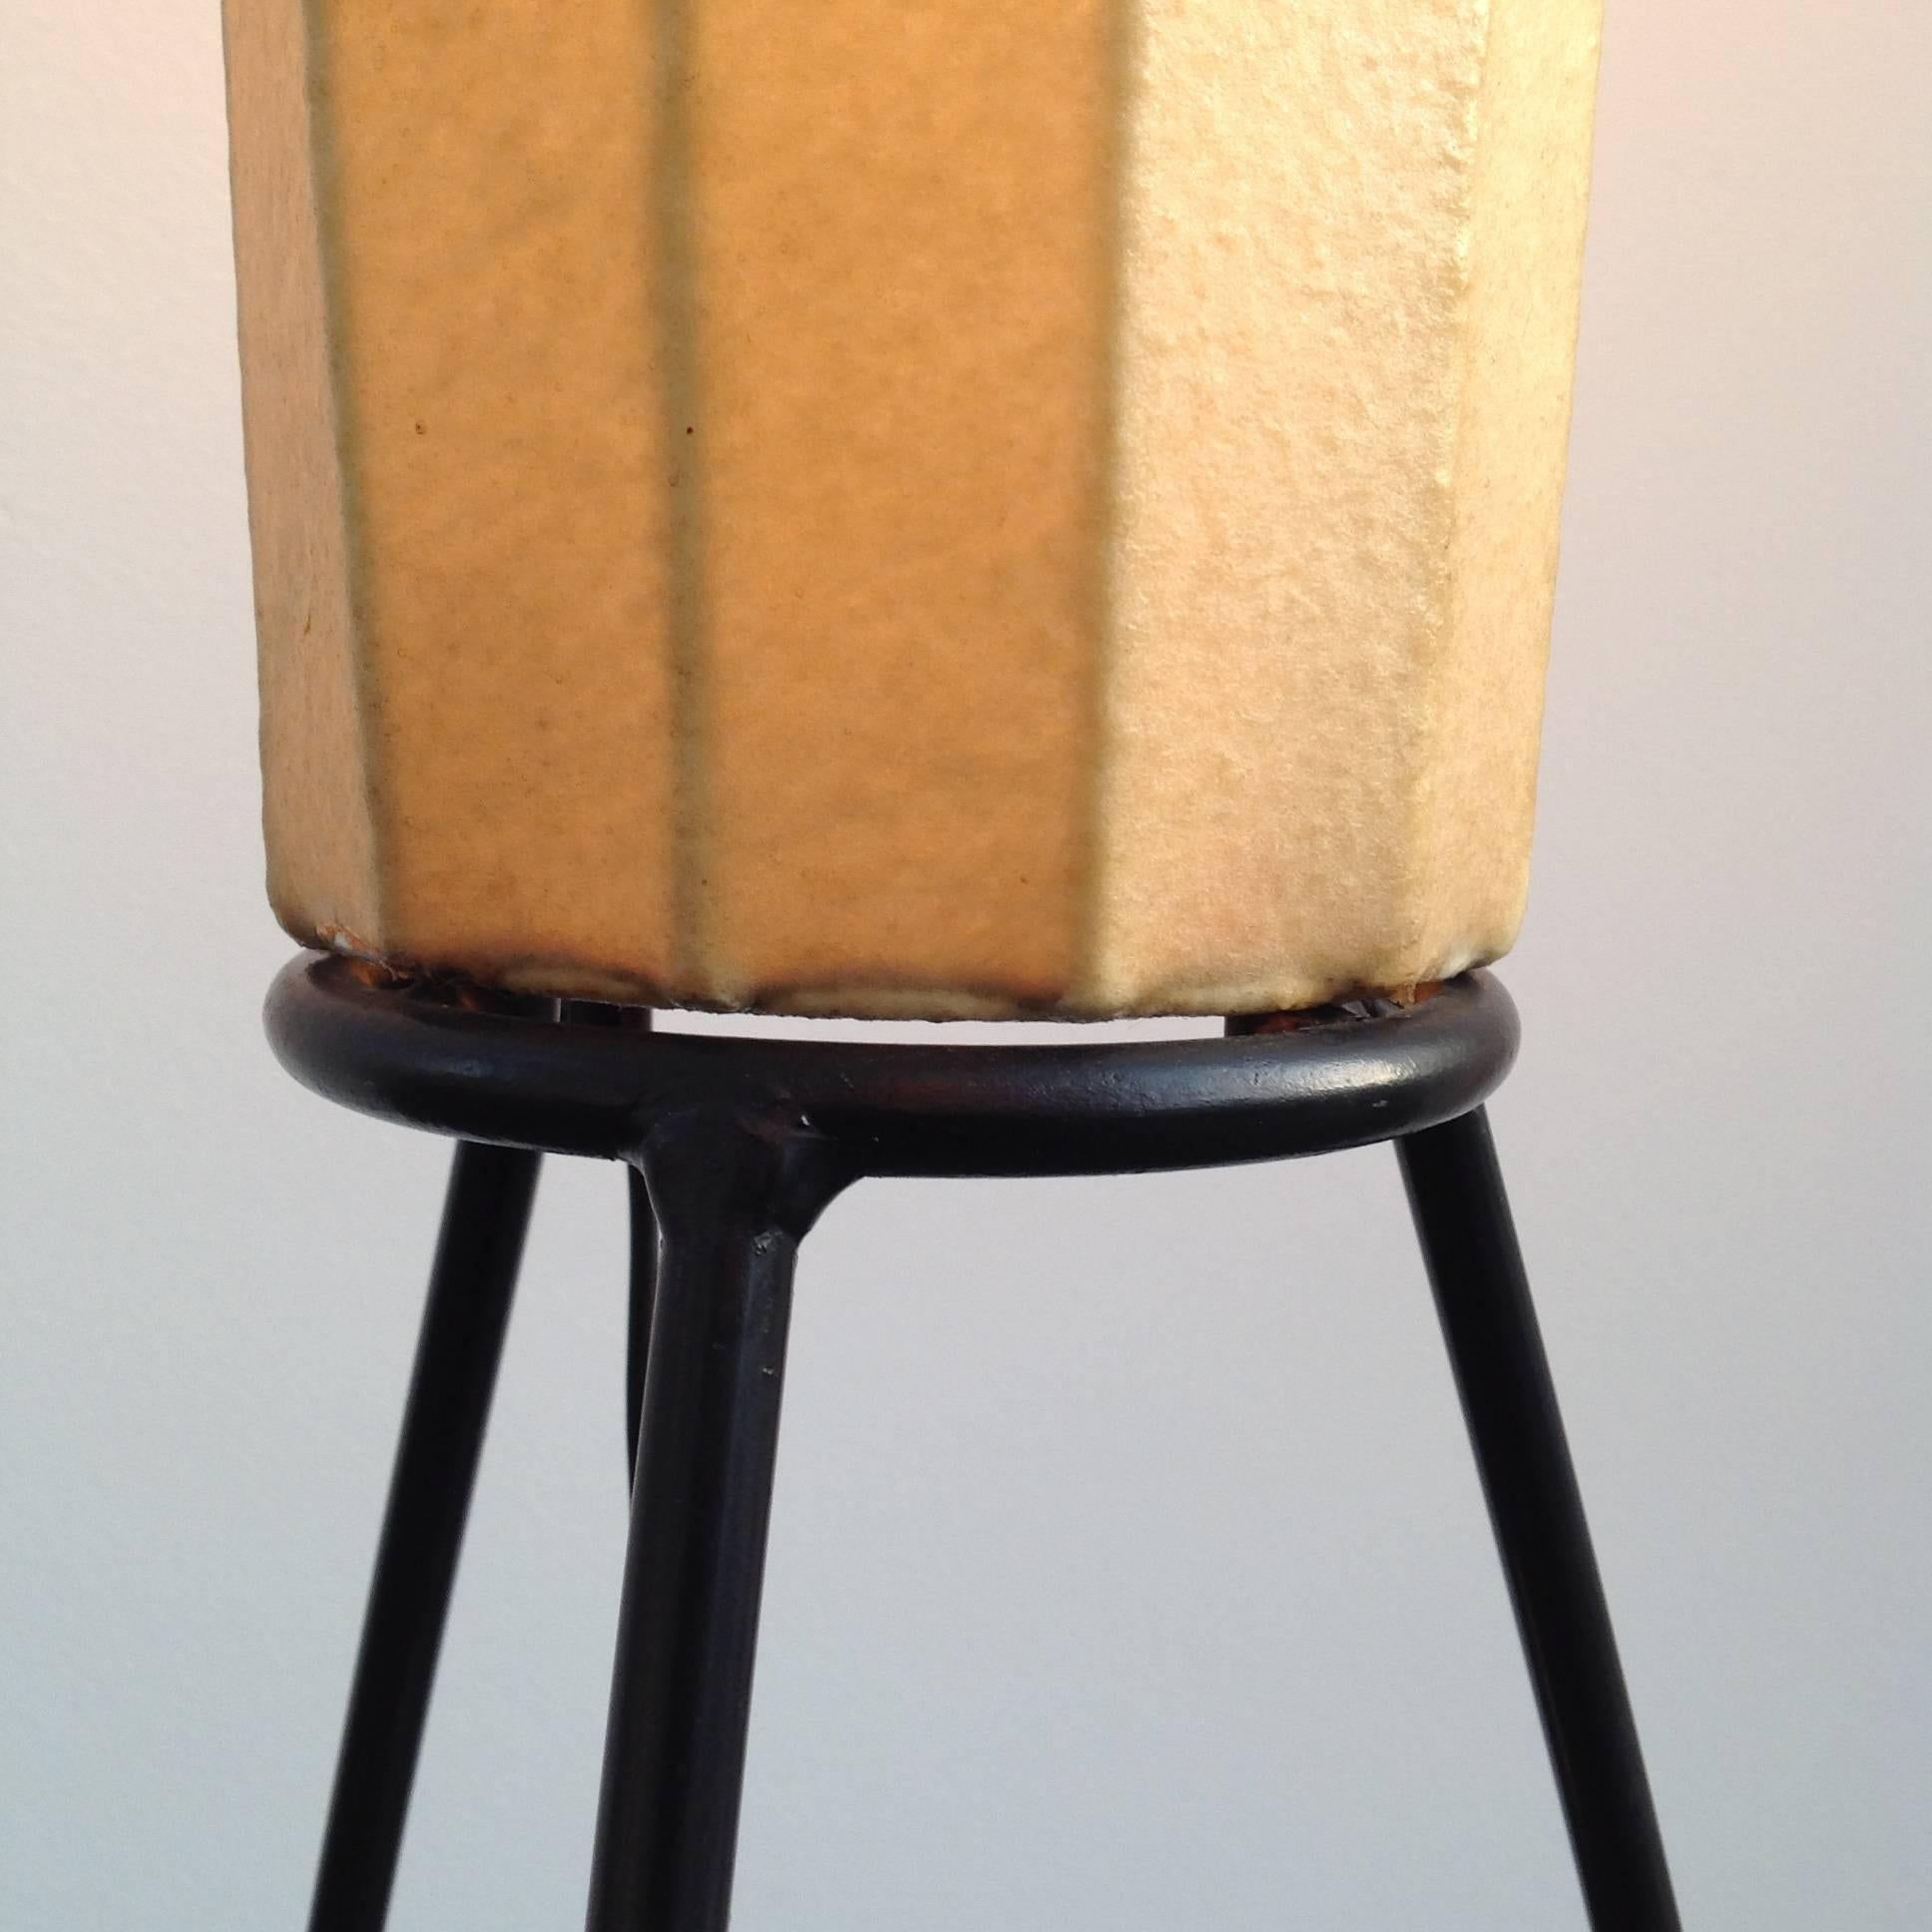 Lacquered First Edition H. Klingle Lugano Floor Lamp for Artimeta, 1957 For Sale